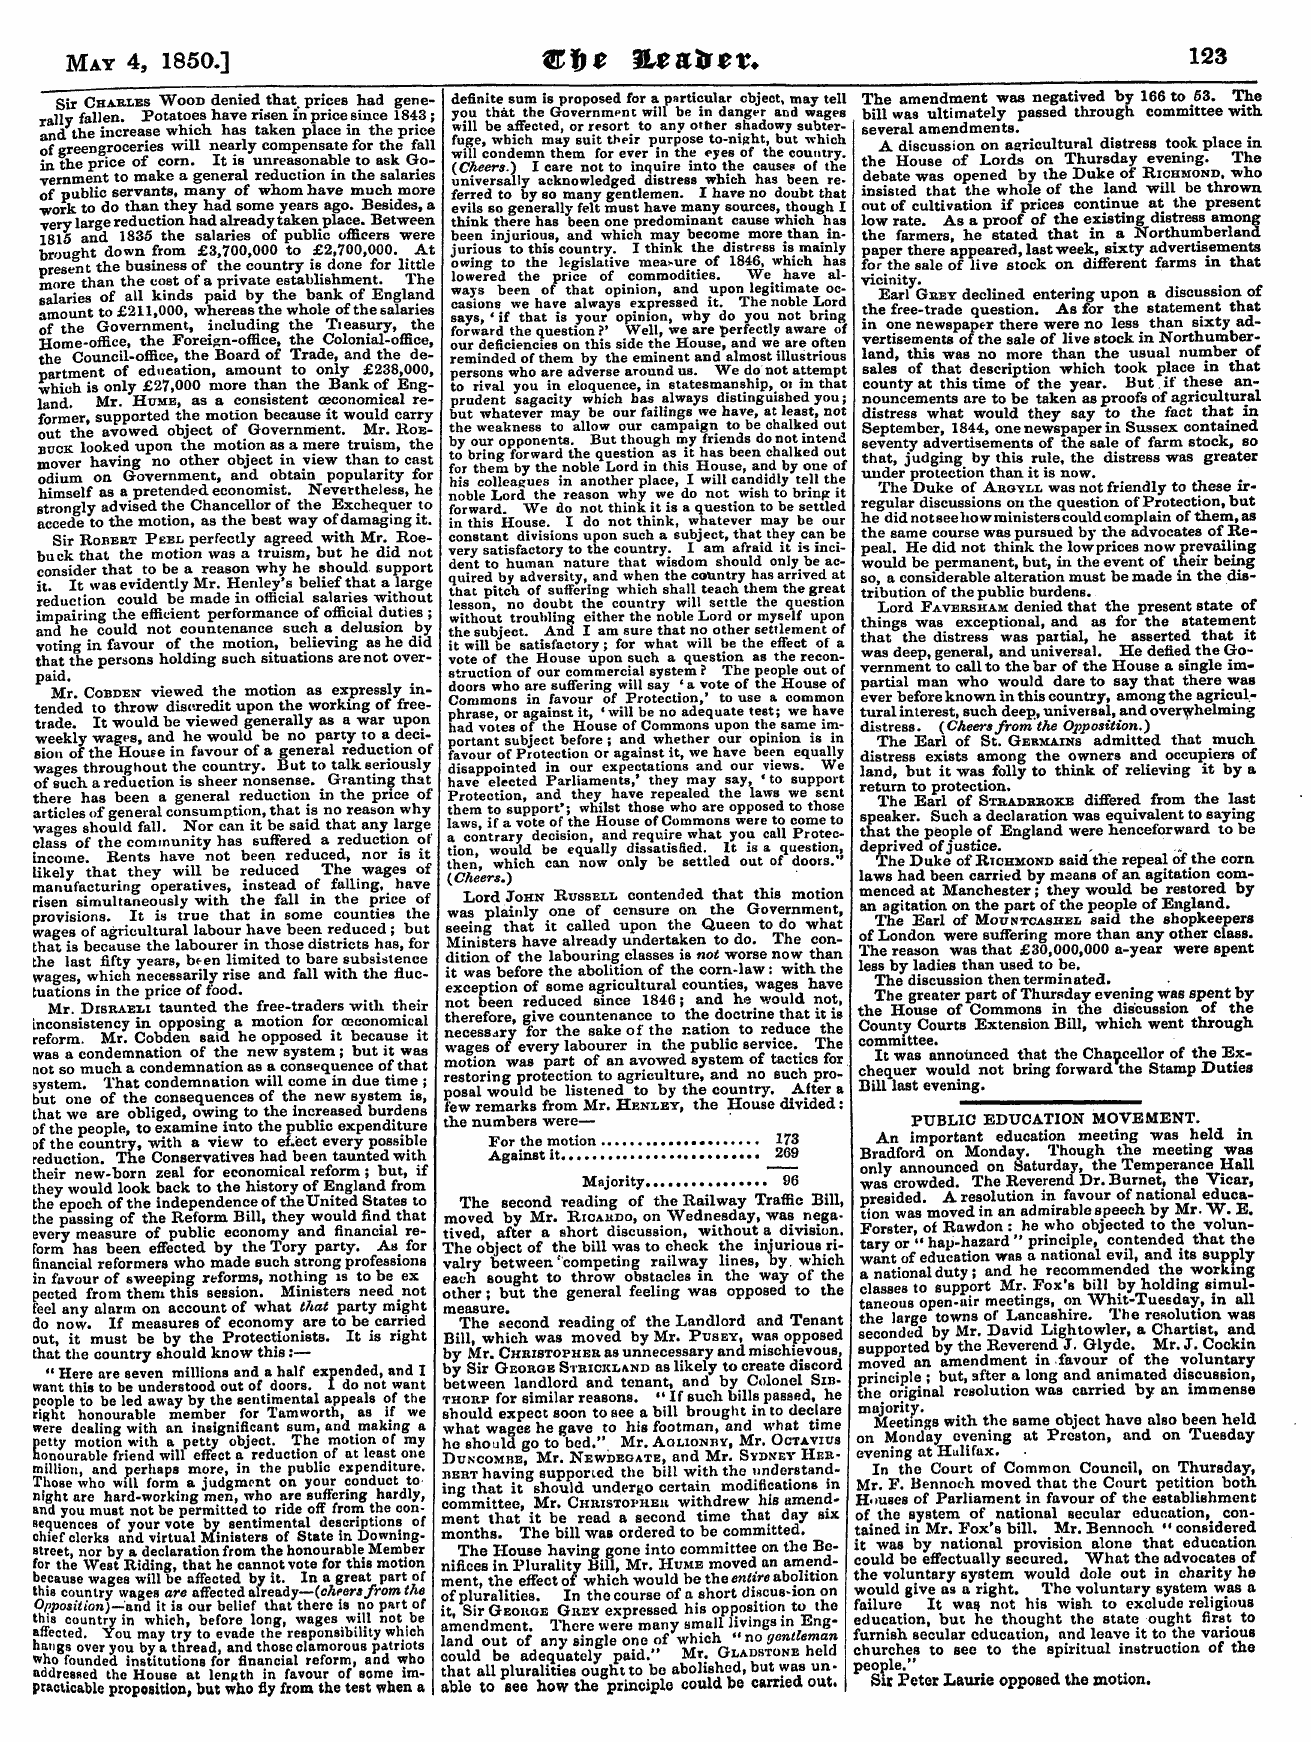 Leader (1850-1860): jS F Y, Country edition - May 4, 1850.] ©Ft* Ileailtt. 123